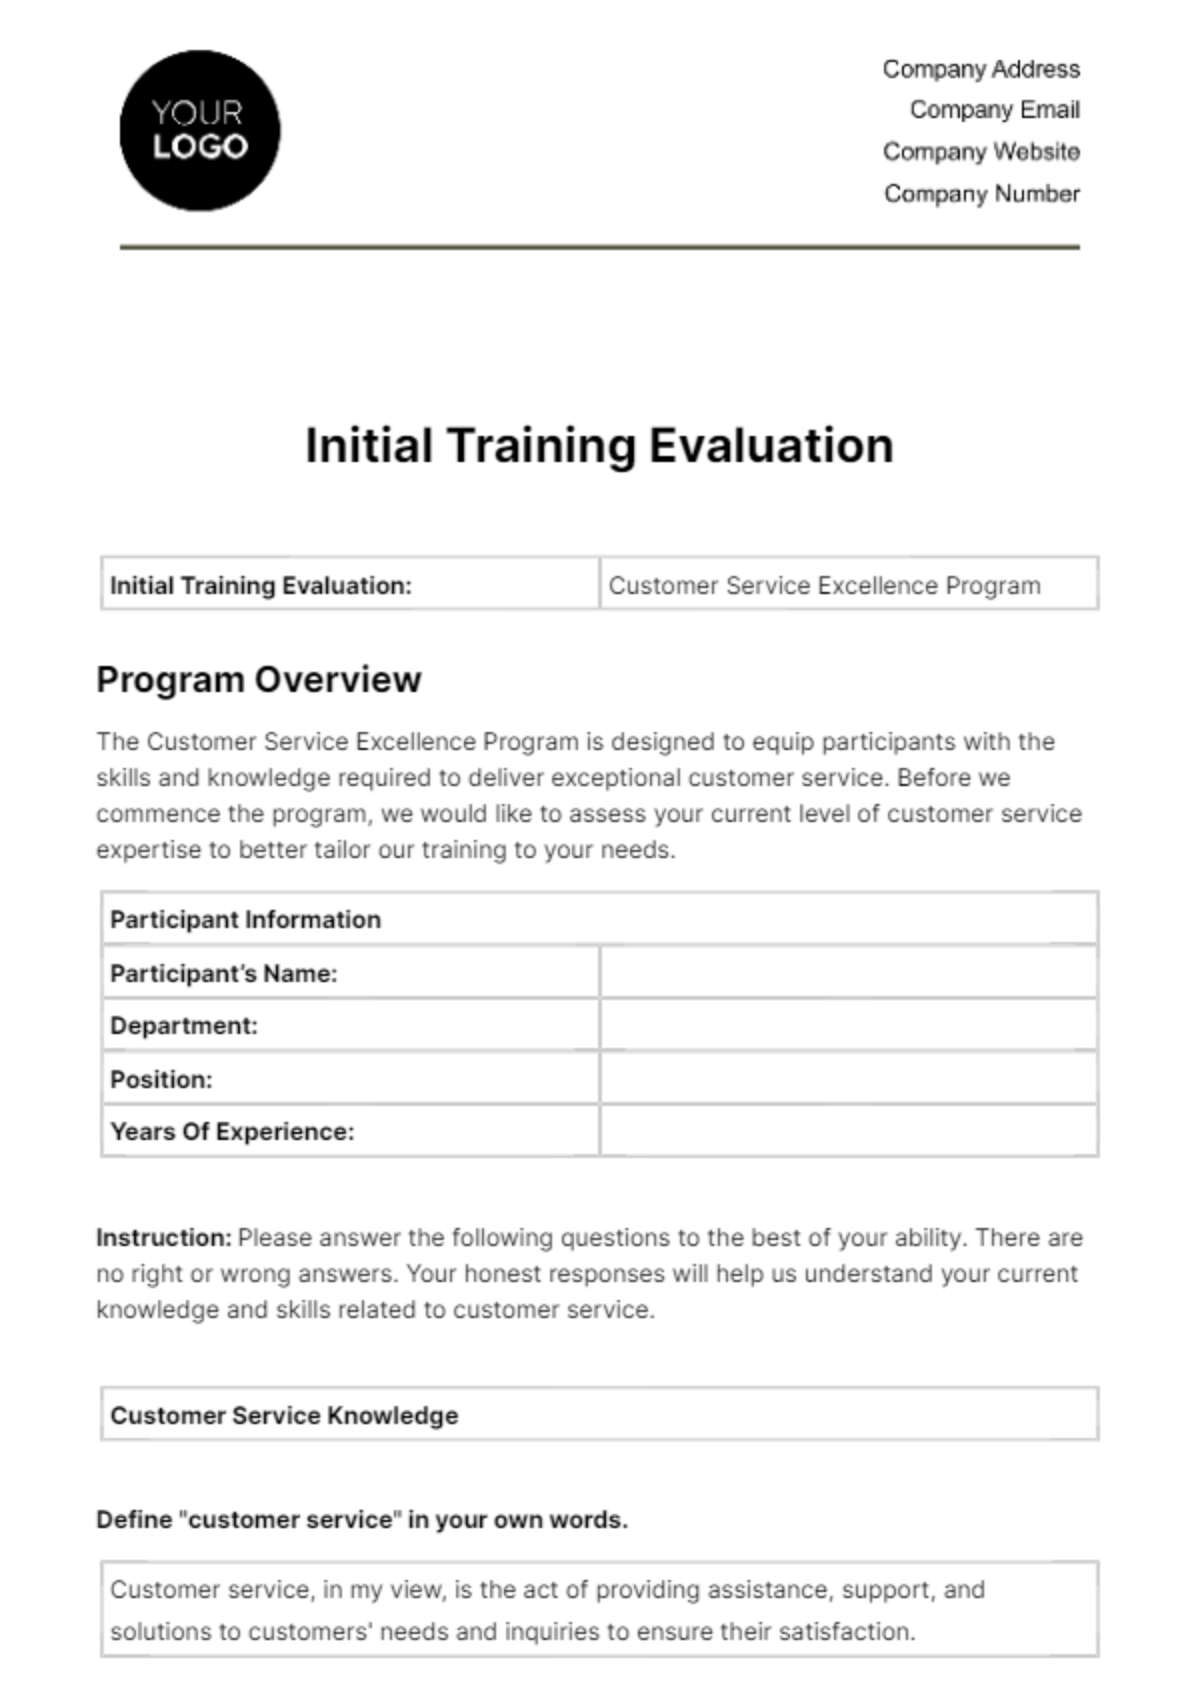 Free Initial Training Evaluation HR Template